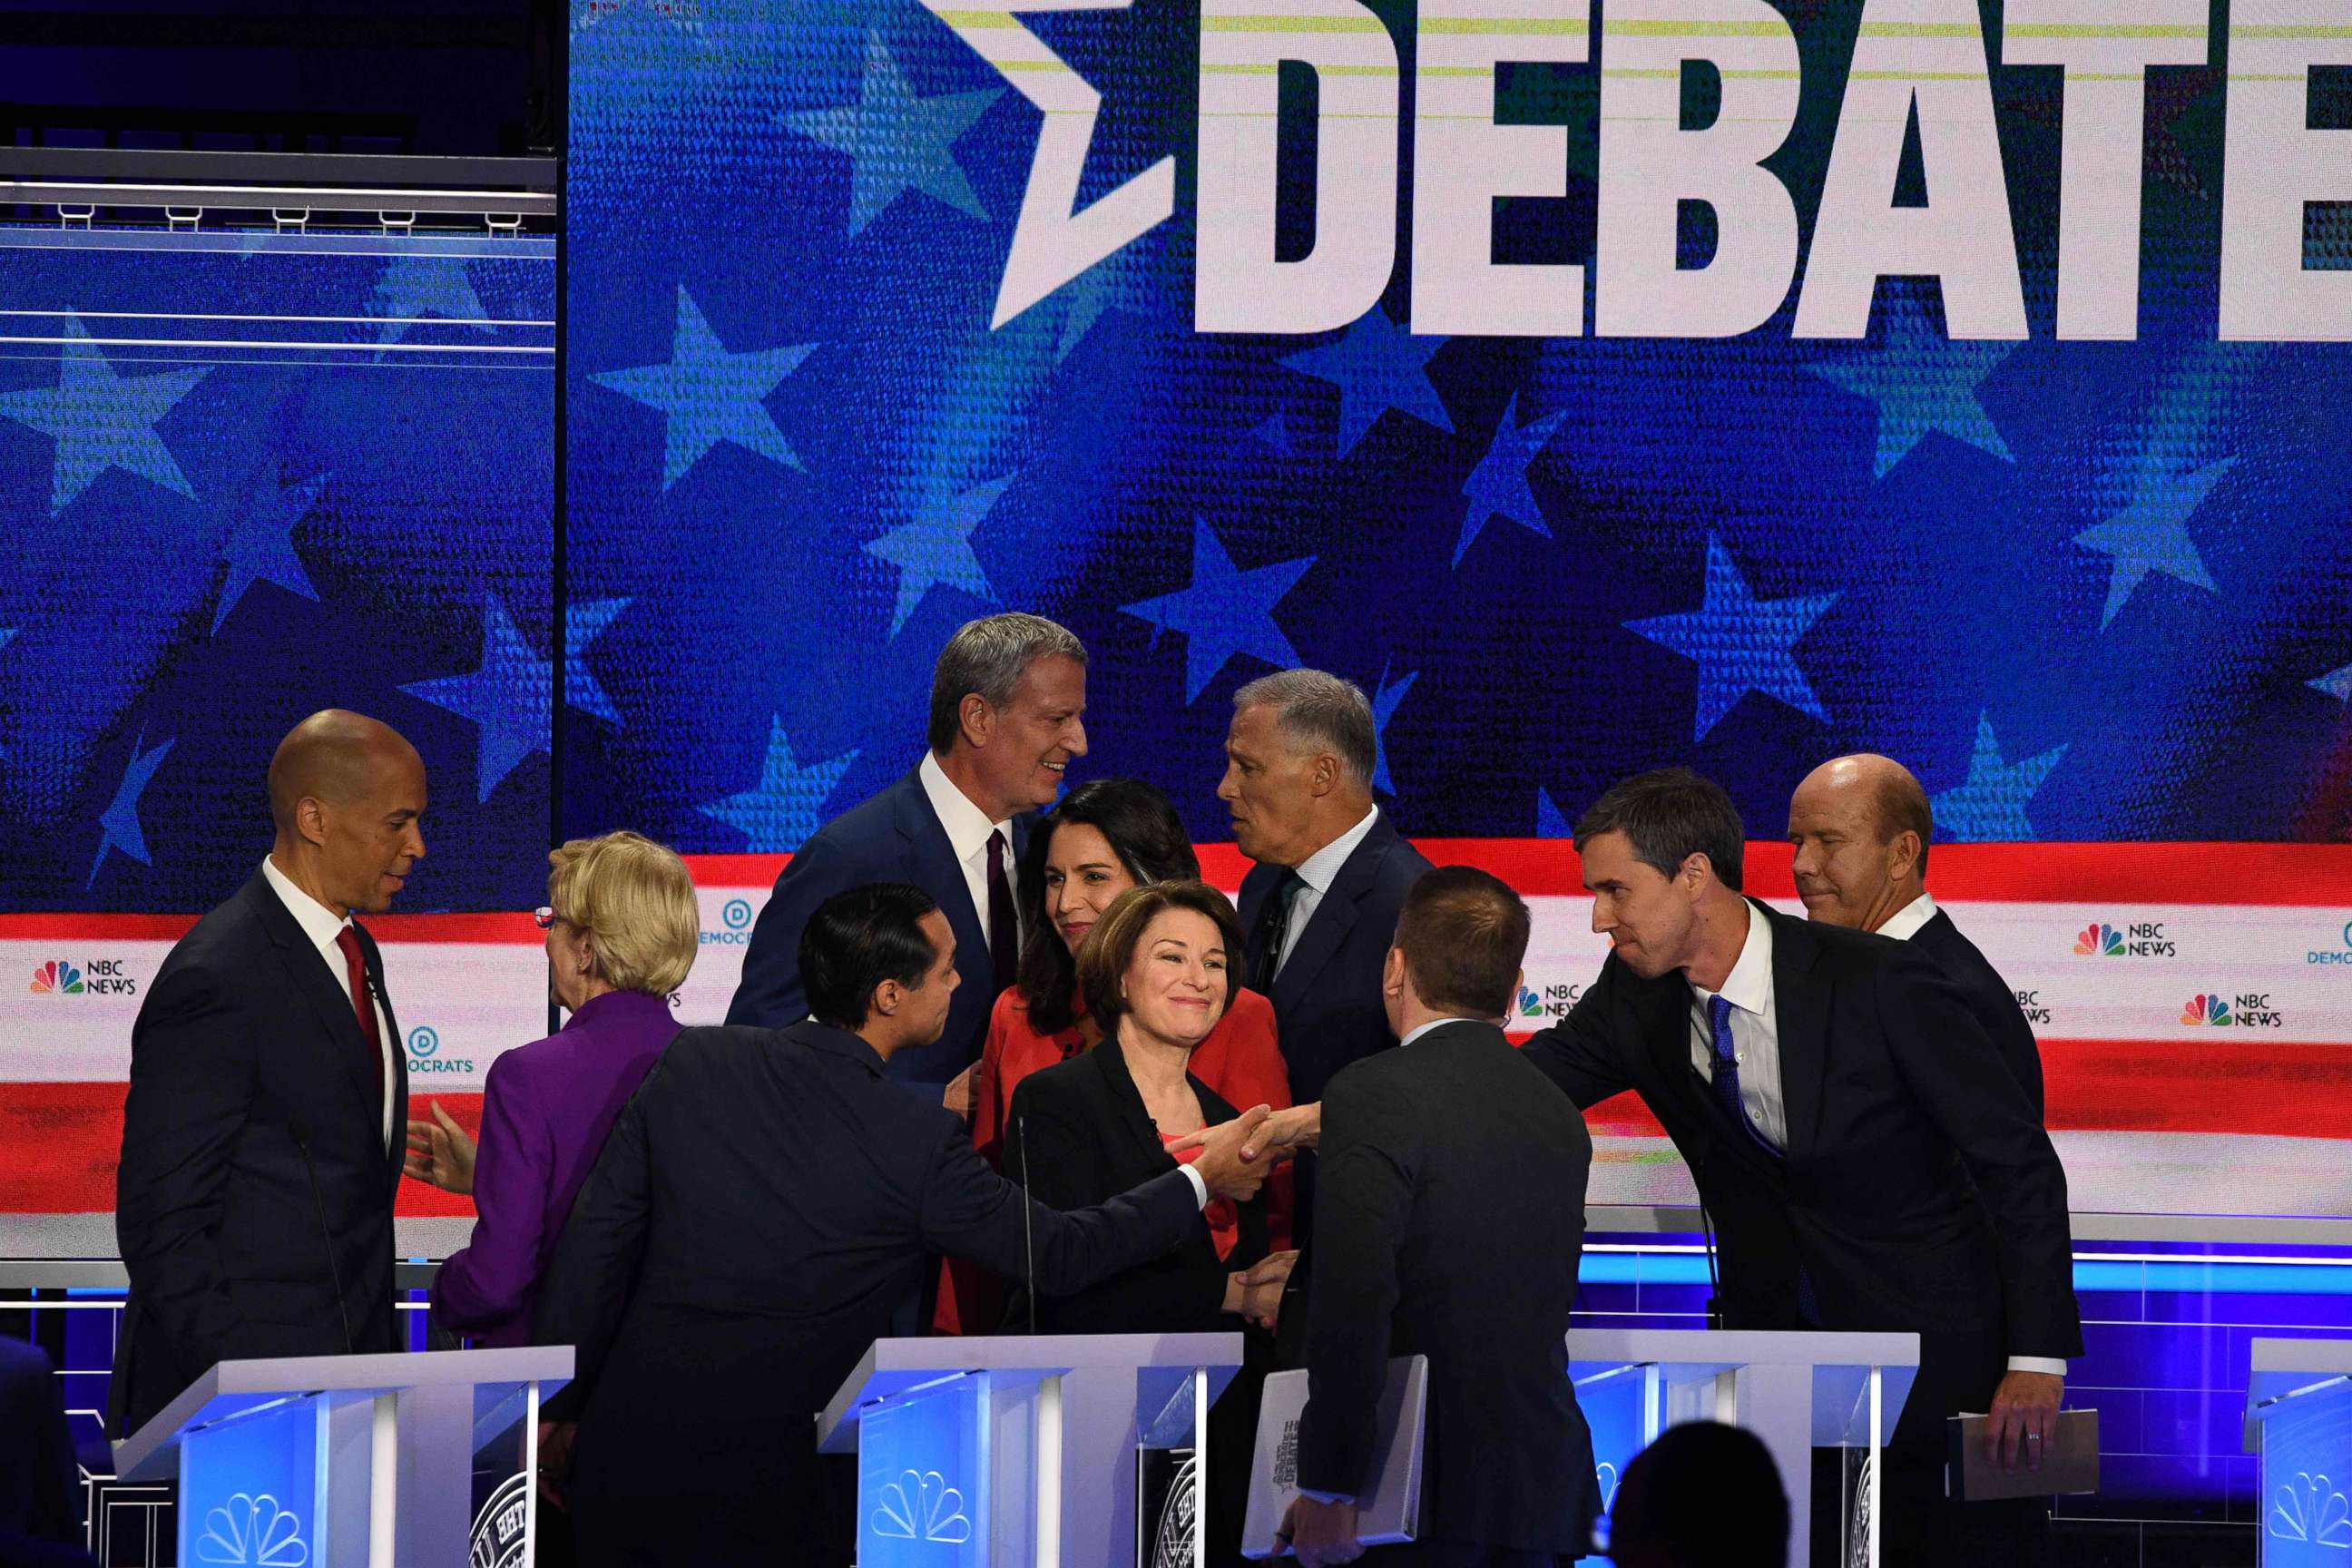 PHOTO: Democratic presidential hopefuls greet each other at the end of the first night of the Democratic presidential primary debate hosted by NBC News at the Adrienne Arsht Center for the Performing Arts in Miami, June 26, 2019.